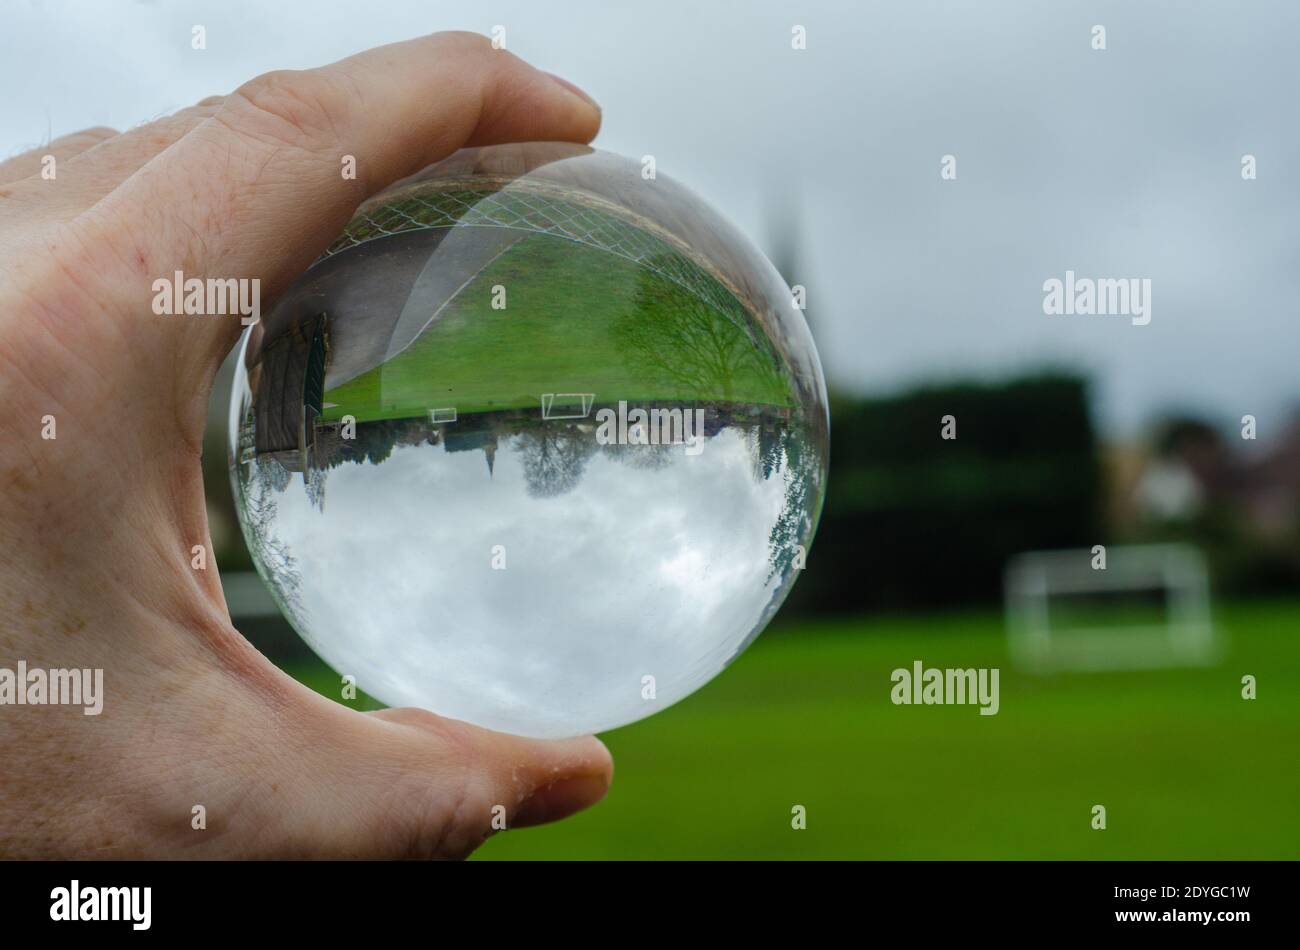 A playing field with goal posts is seen upside down in a glass sphere due to the optical effect of refraction, Stock Photo